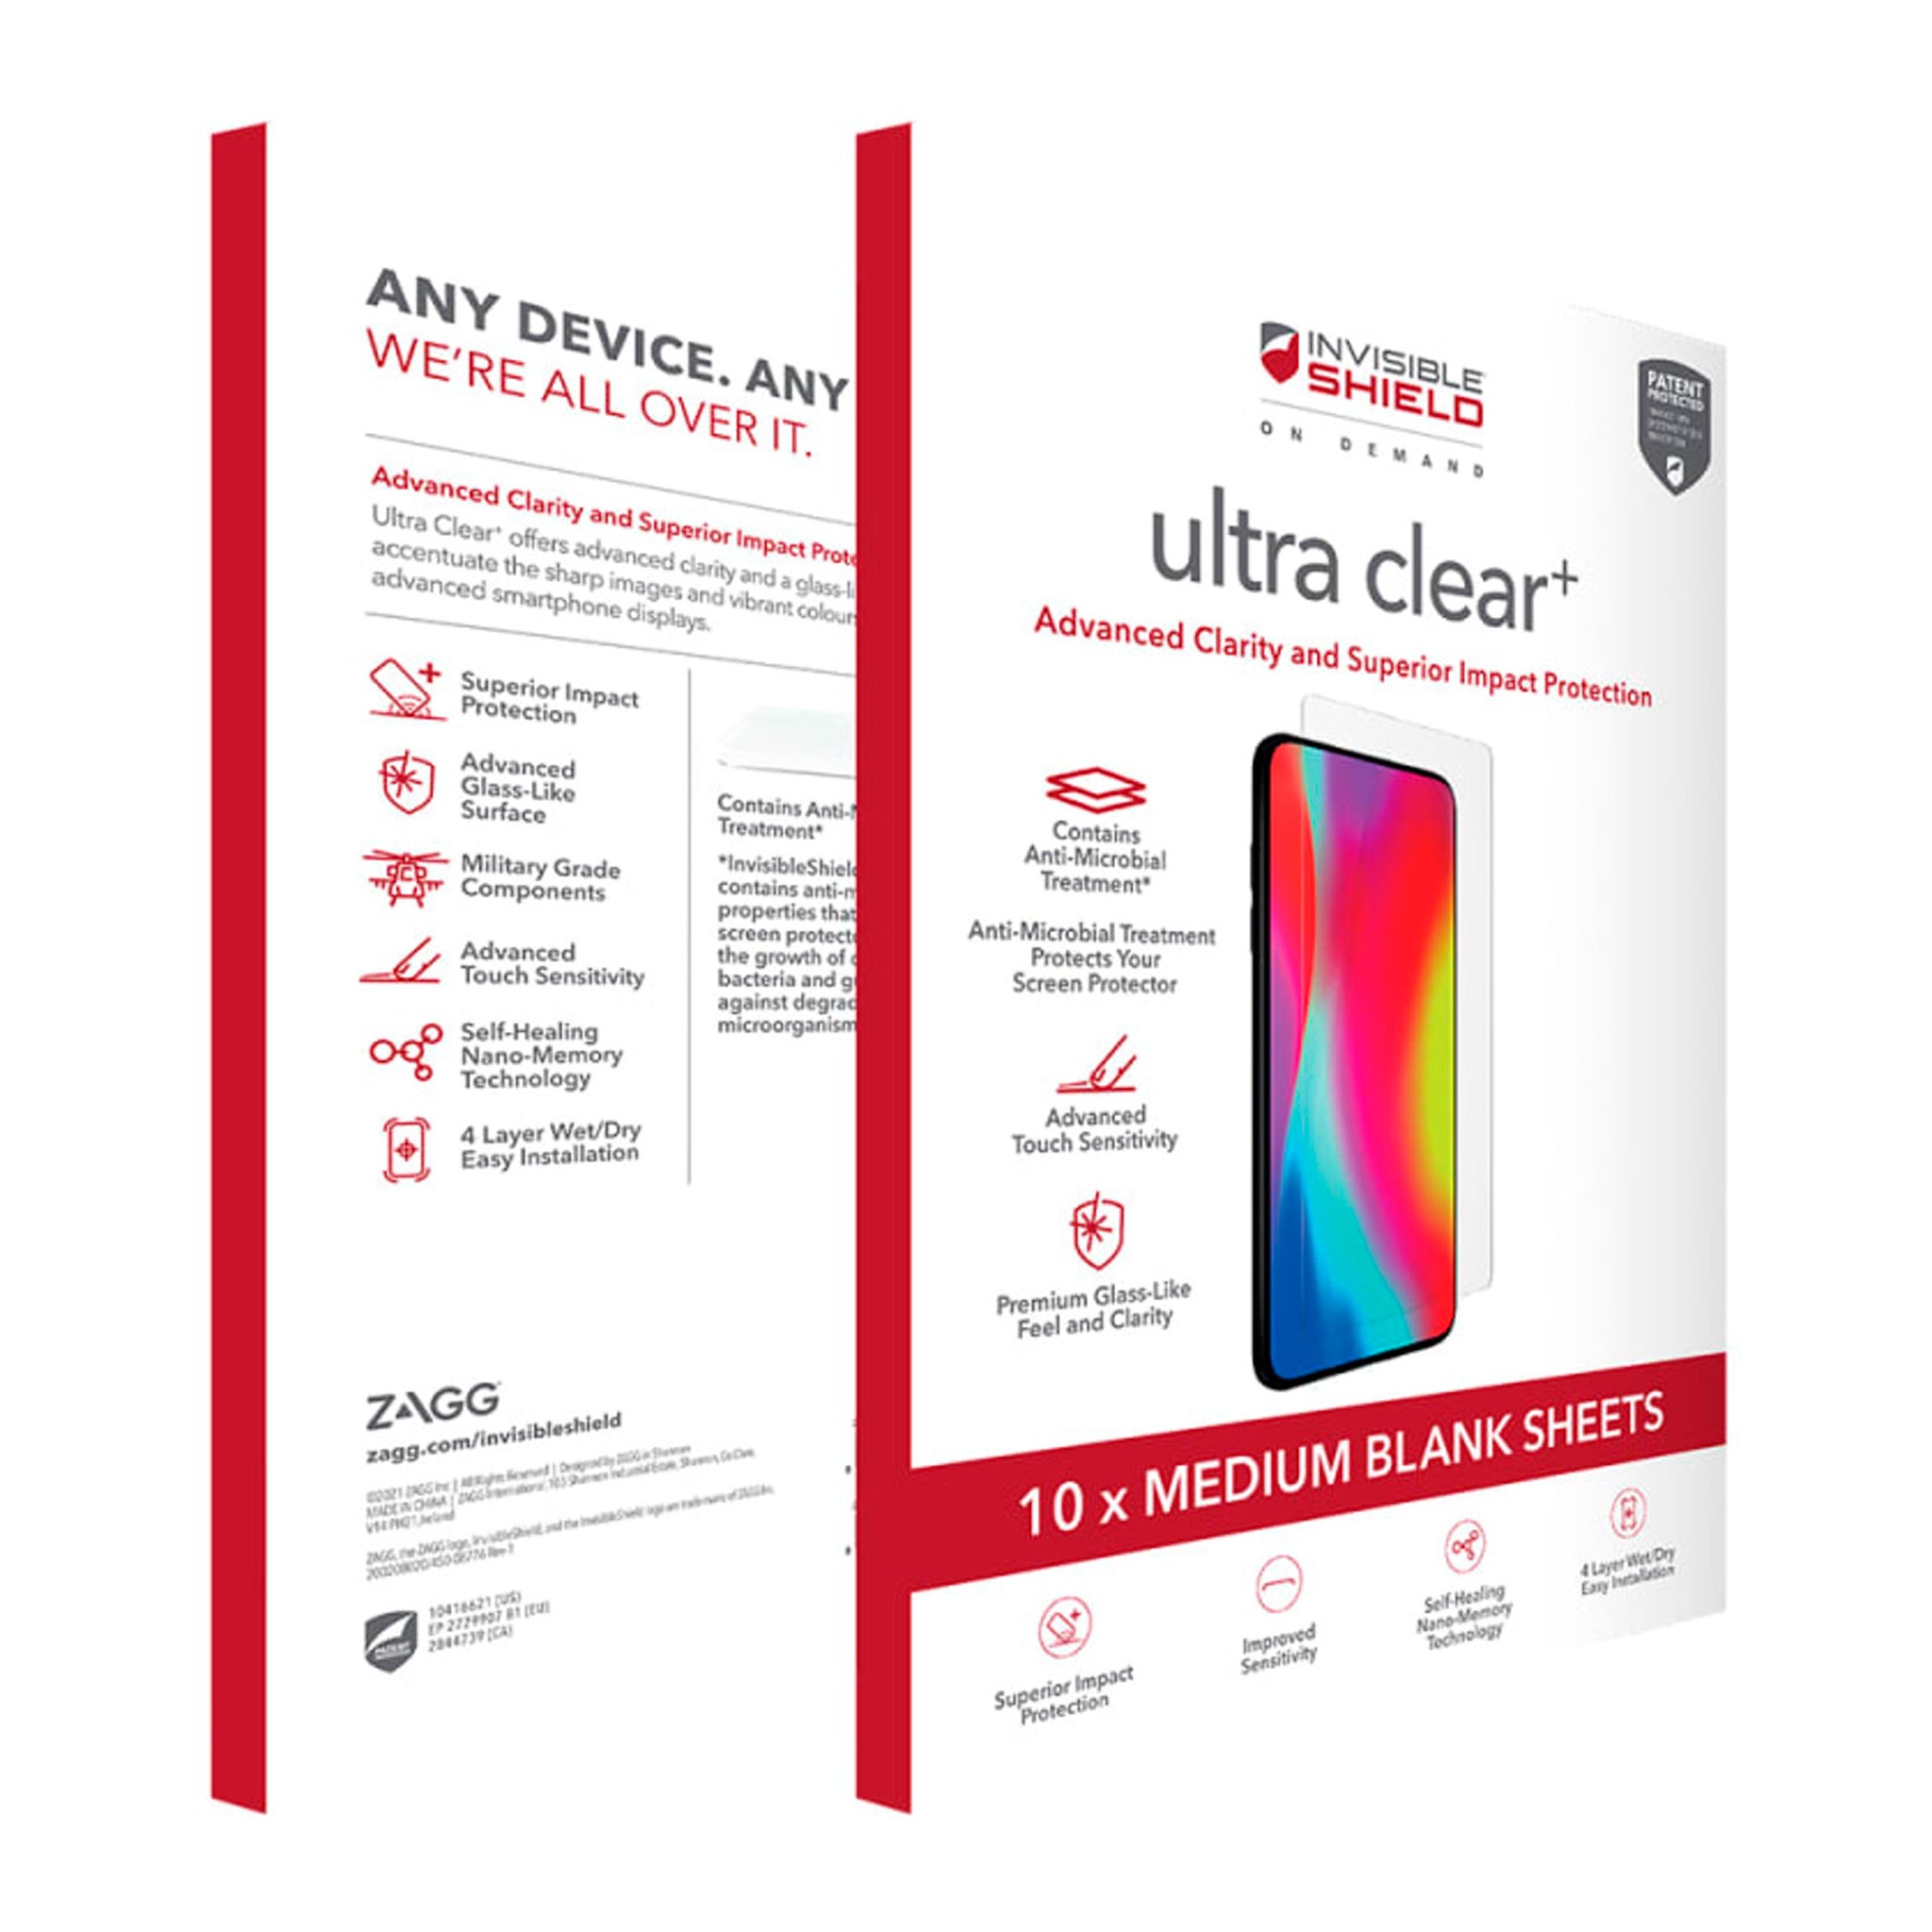 Zagg - Isod Ultra Clear Plus 4 Layer Film Screen Protector 10 Pack For Medium Screens - Clear